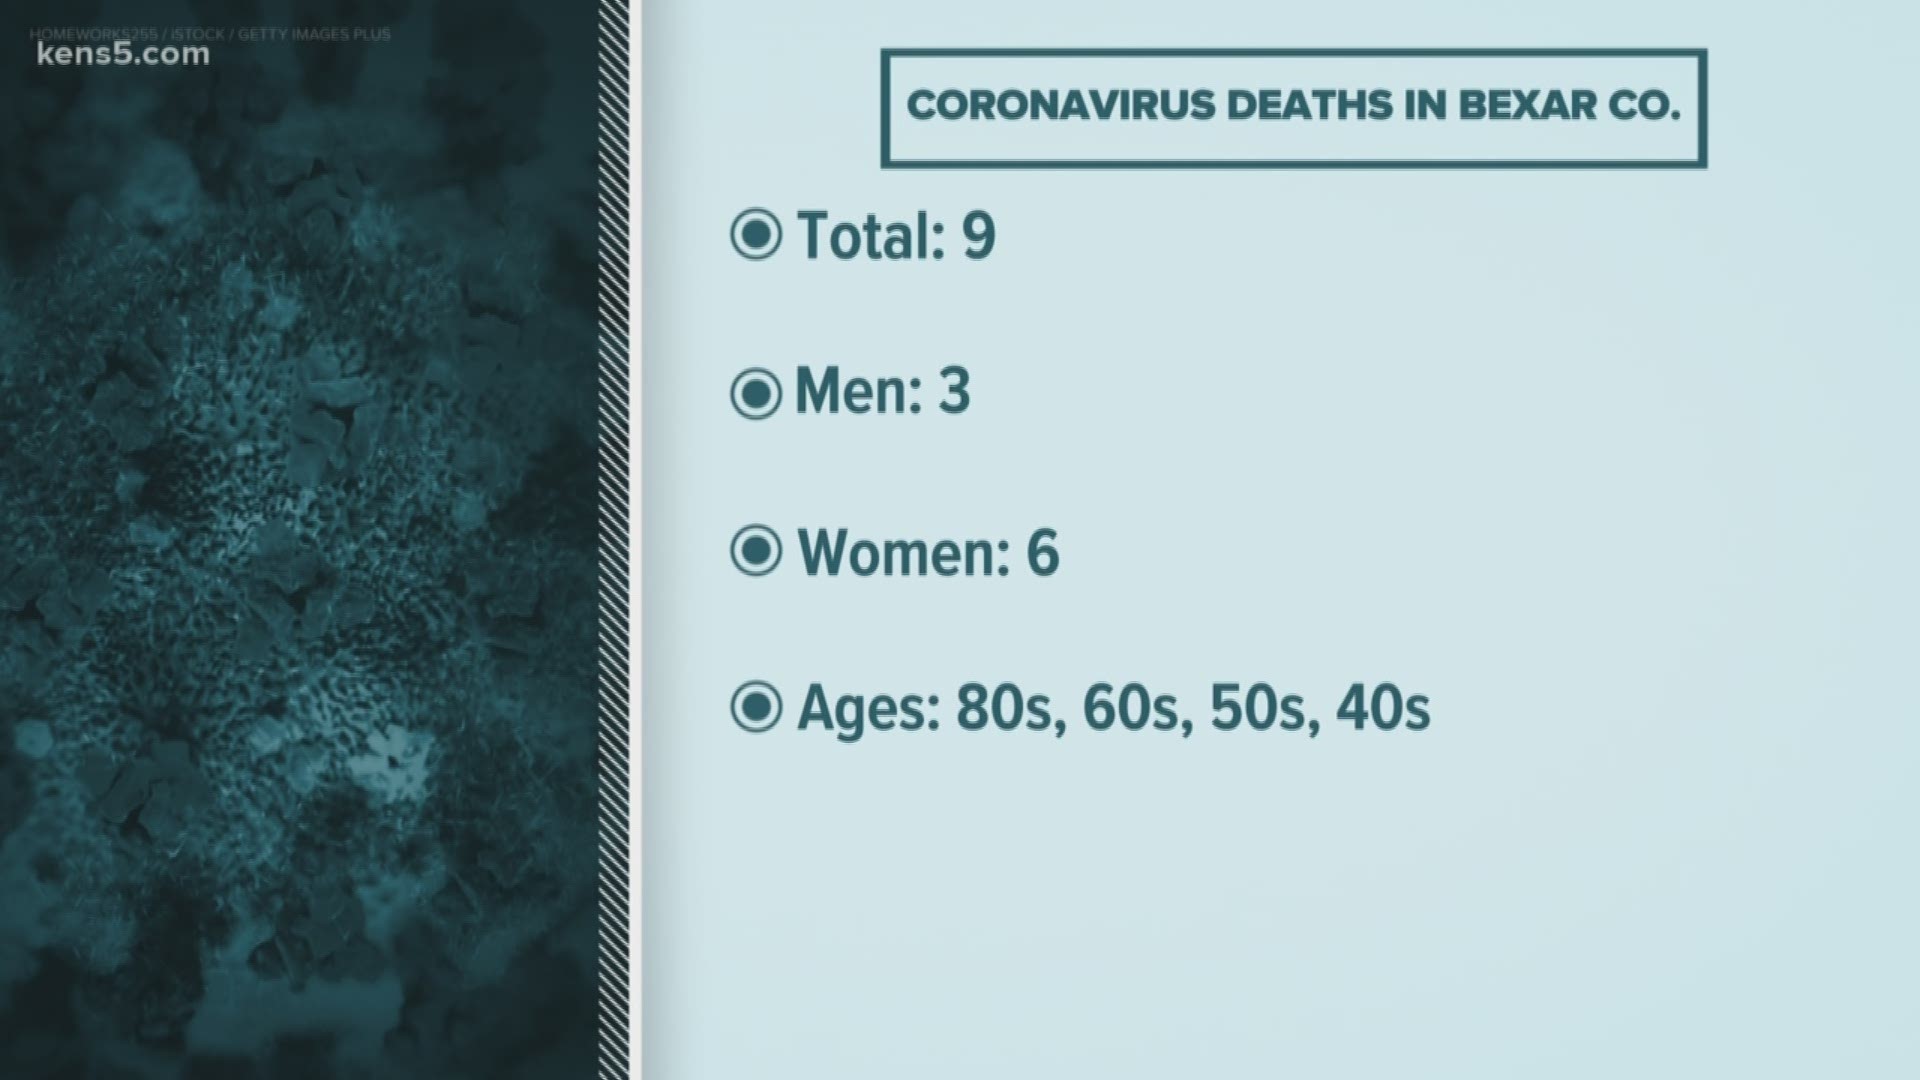 At 9:20 a.m., we will have a moment of silence for coronavirus victims as well as those who put their life on the line to aid those in need.